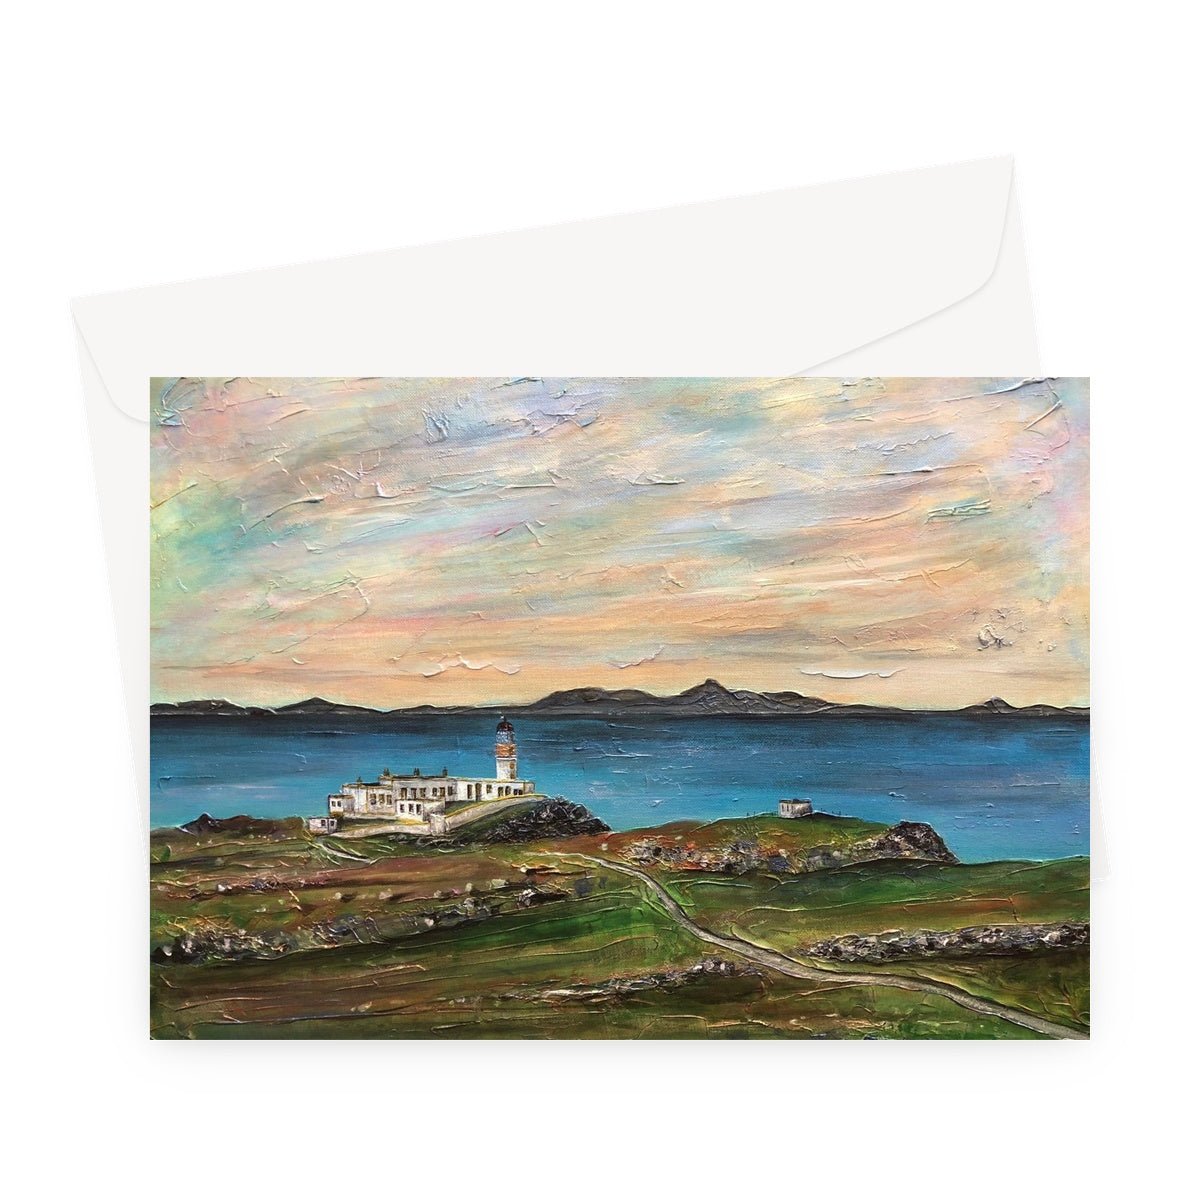 Neist Point Skye Art Gifts Greeting Card-Greetings Cards-Skye Art Gallery-A5 Landscape-1 Card-Paintings, Prints, Homeware, Art Gifts From Scotland By Scottish Artist Kevin Hunter